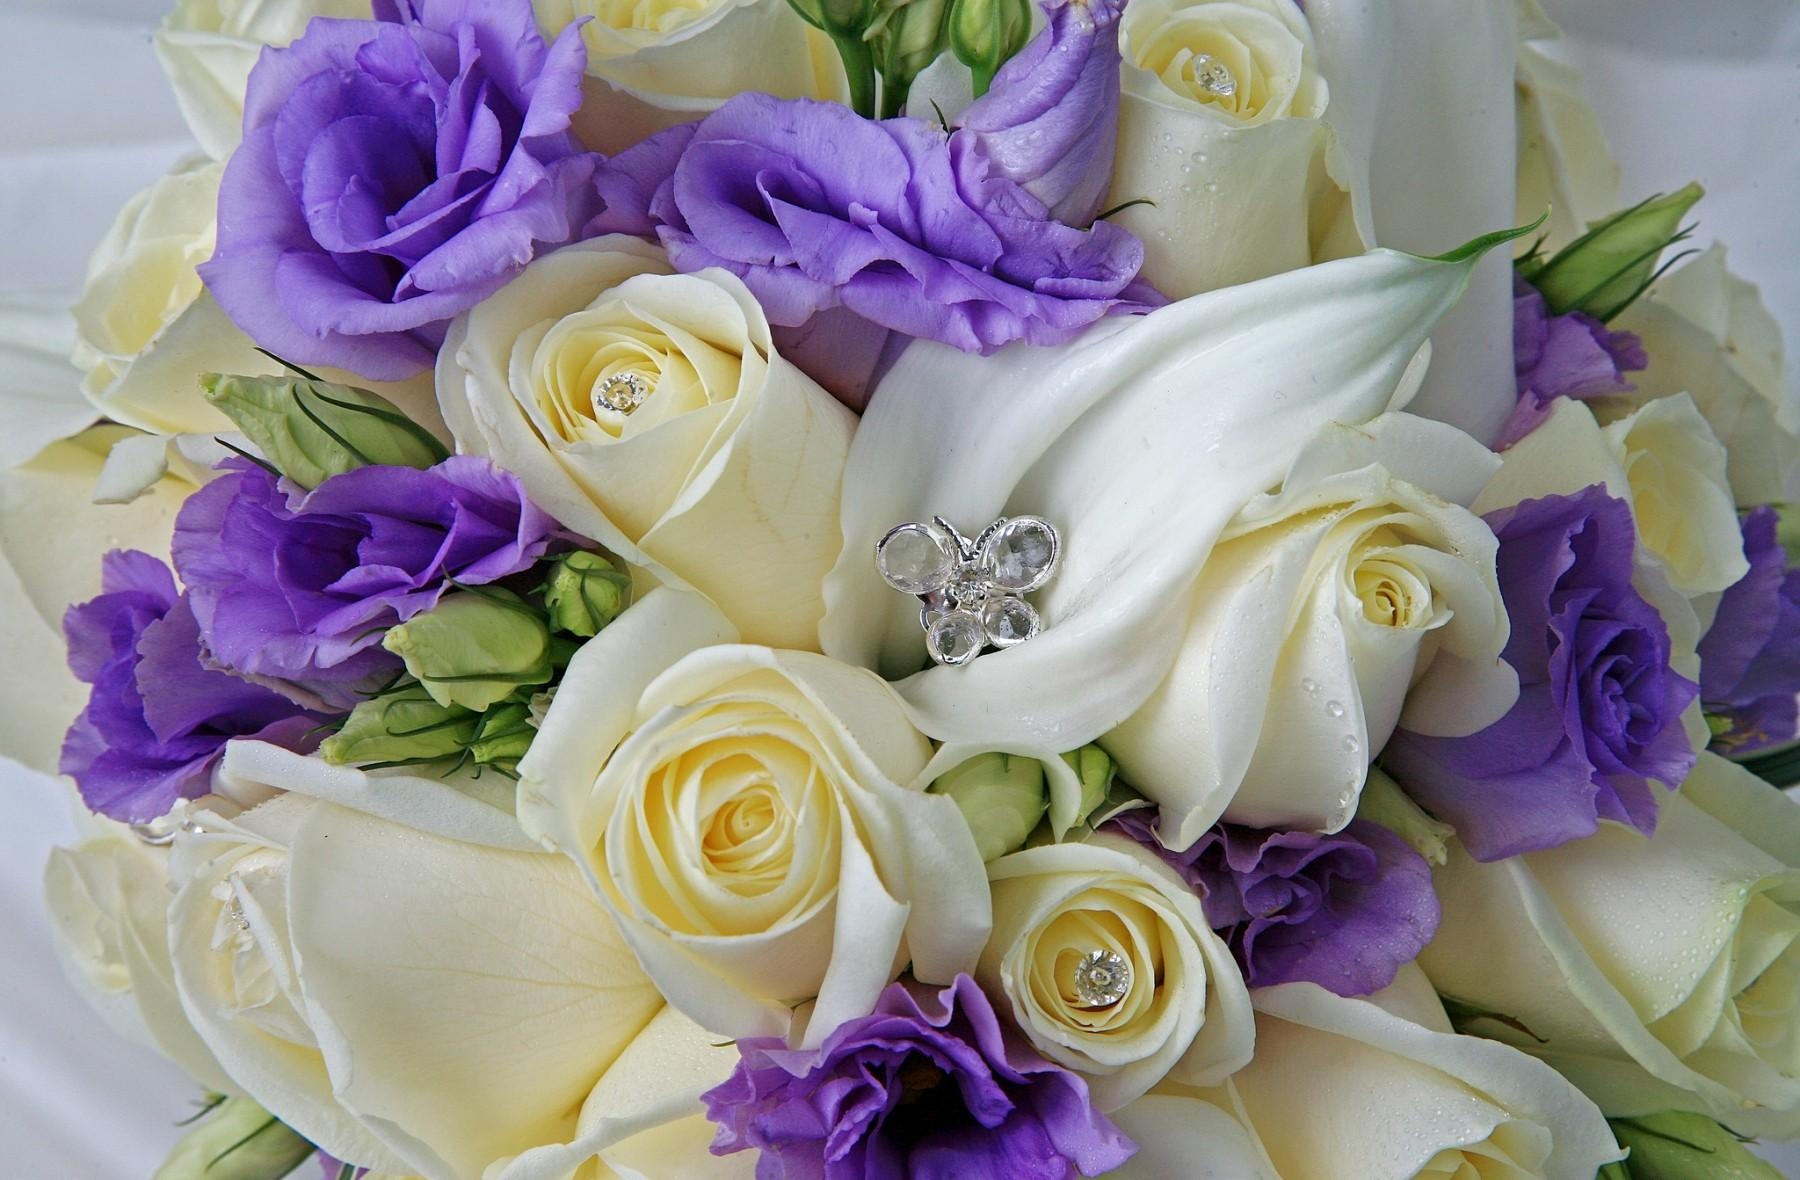 drops, flowers, roses, decorations, bouquet, lisianthus russell, lisiantus russell High Definition image